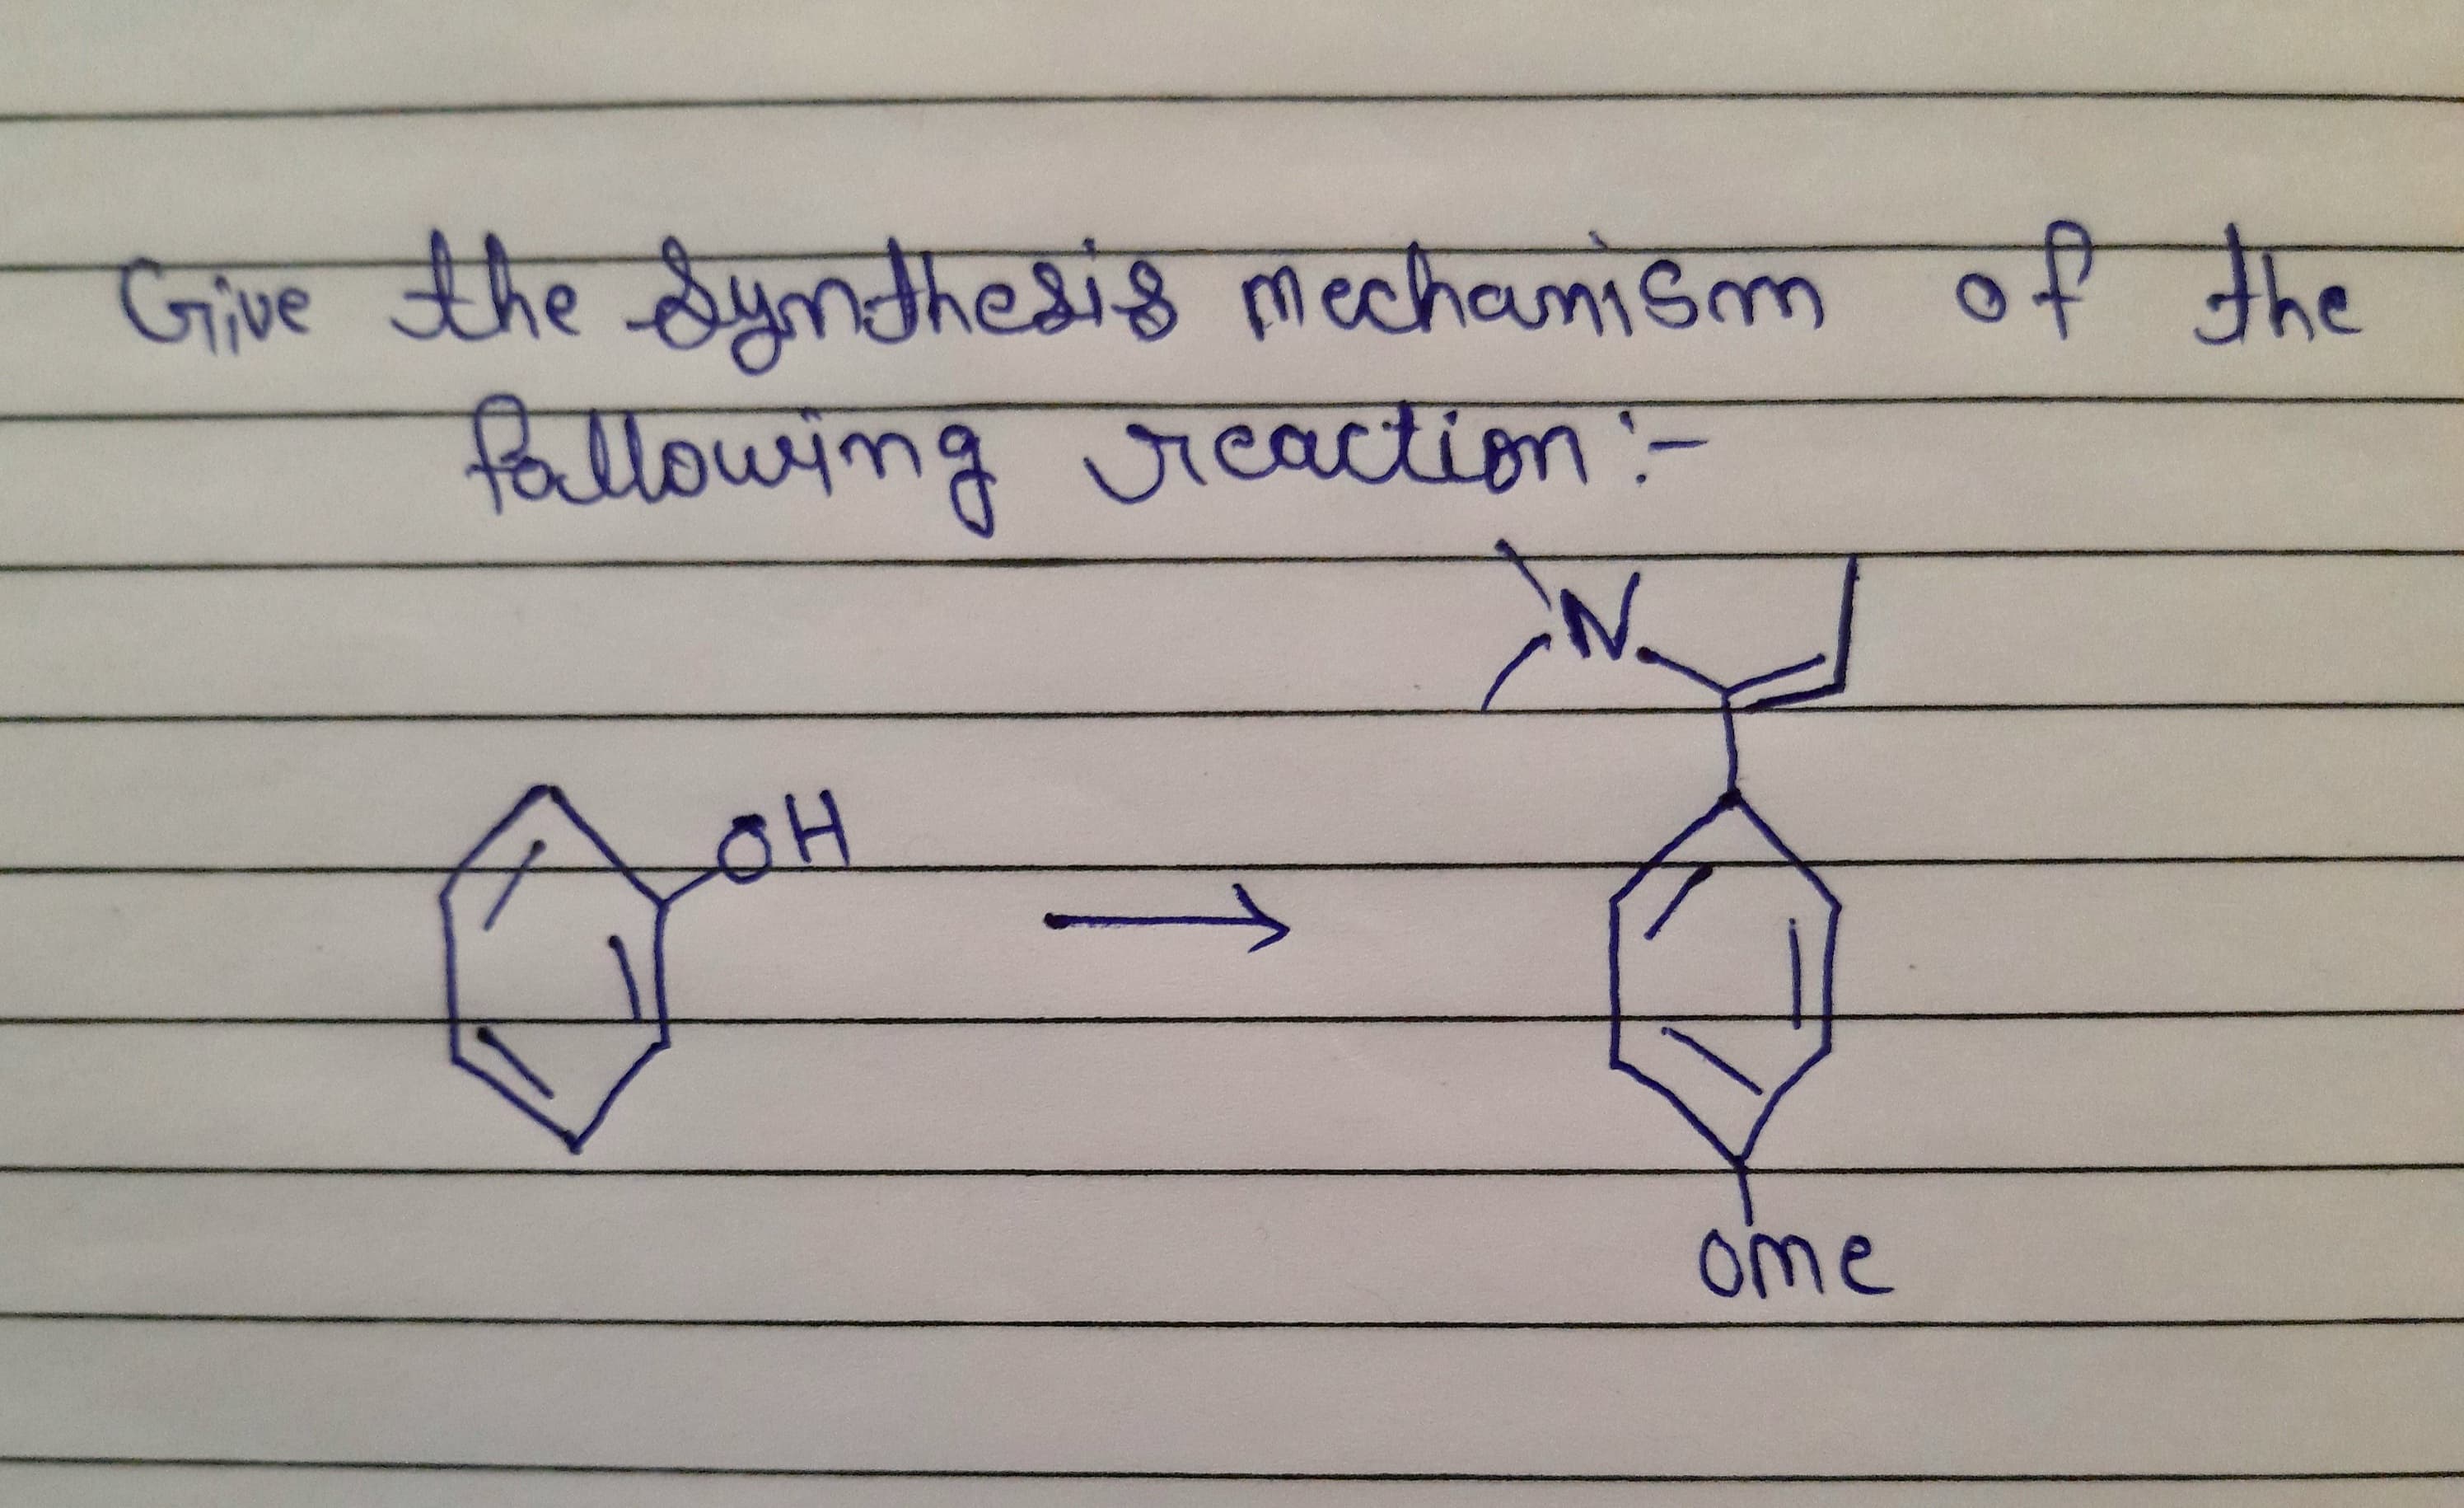 Grive the Synthesig mechanism of the
Pallowing Jicaction:-
oH
ome
